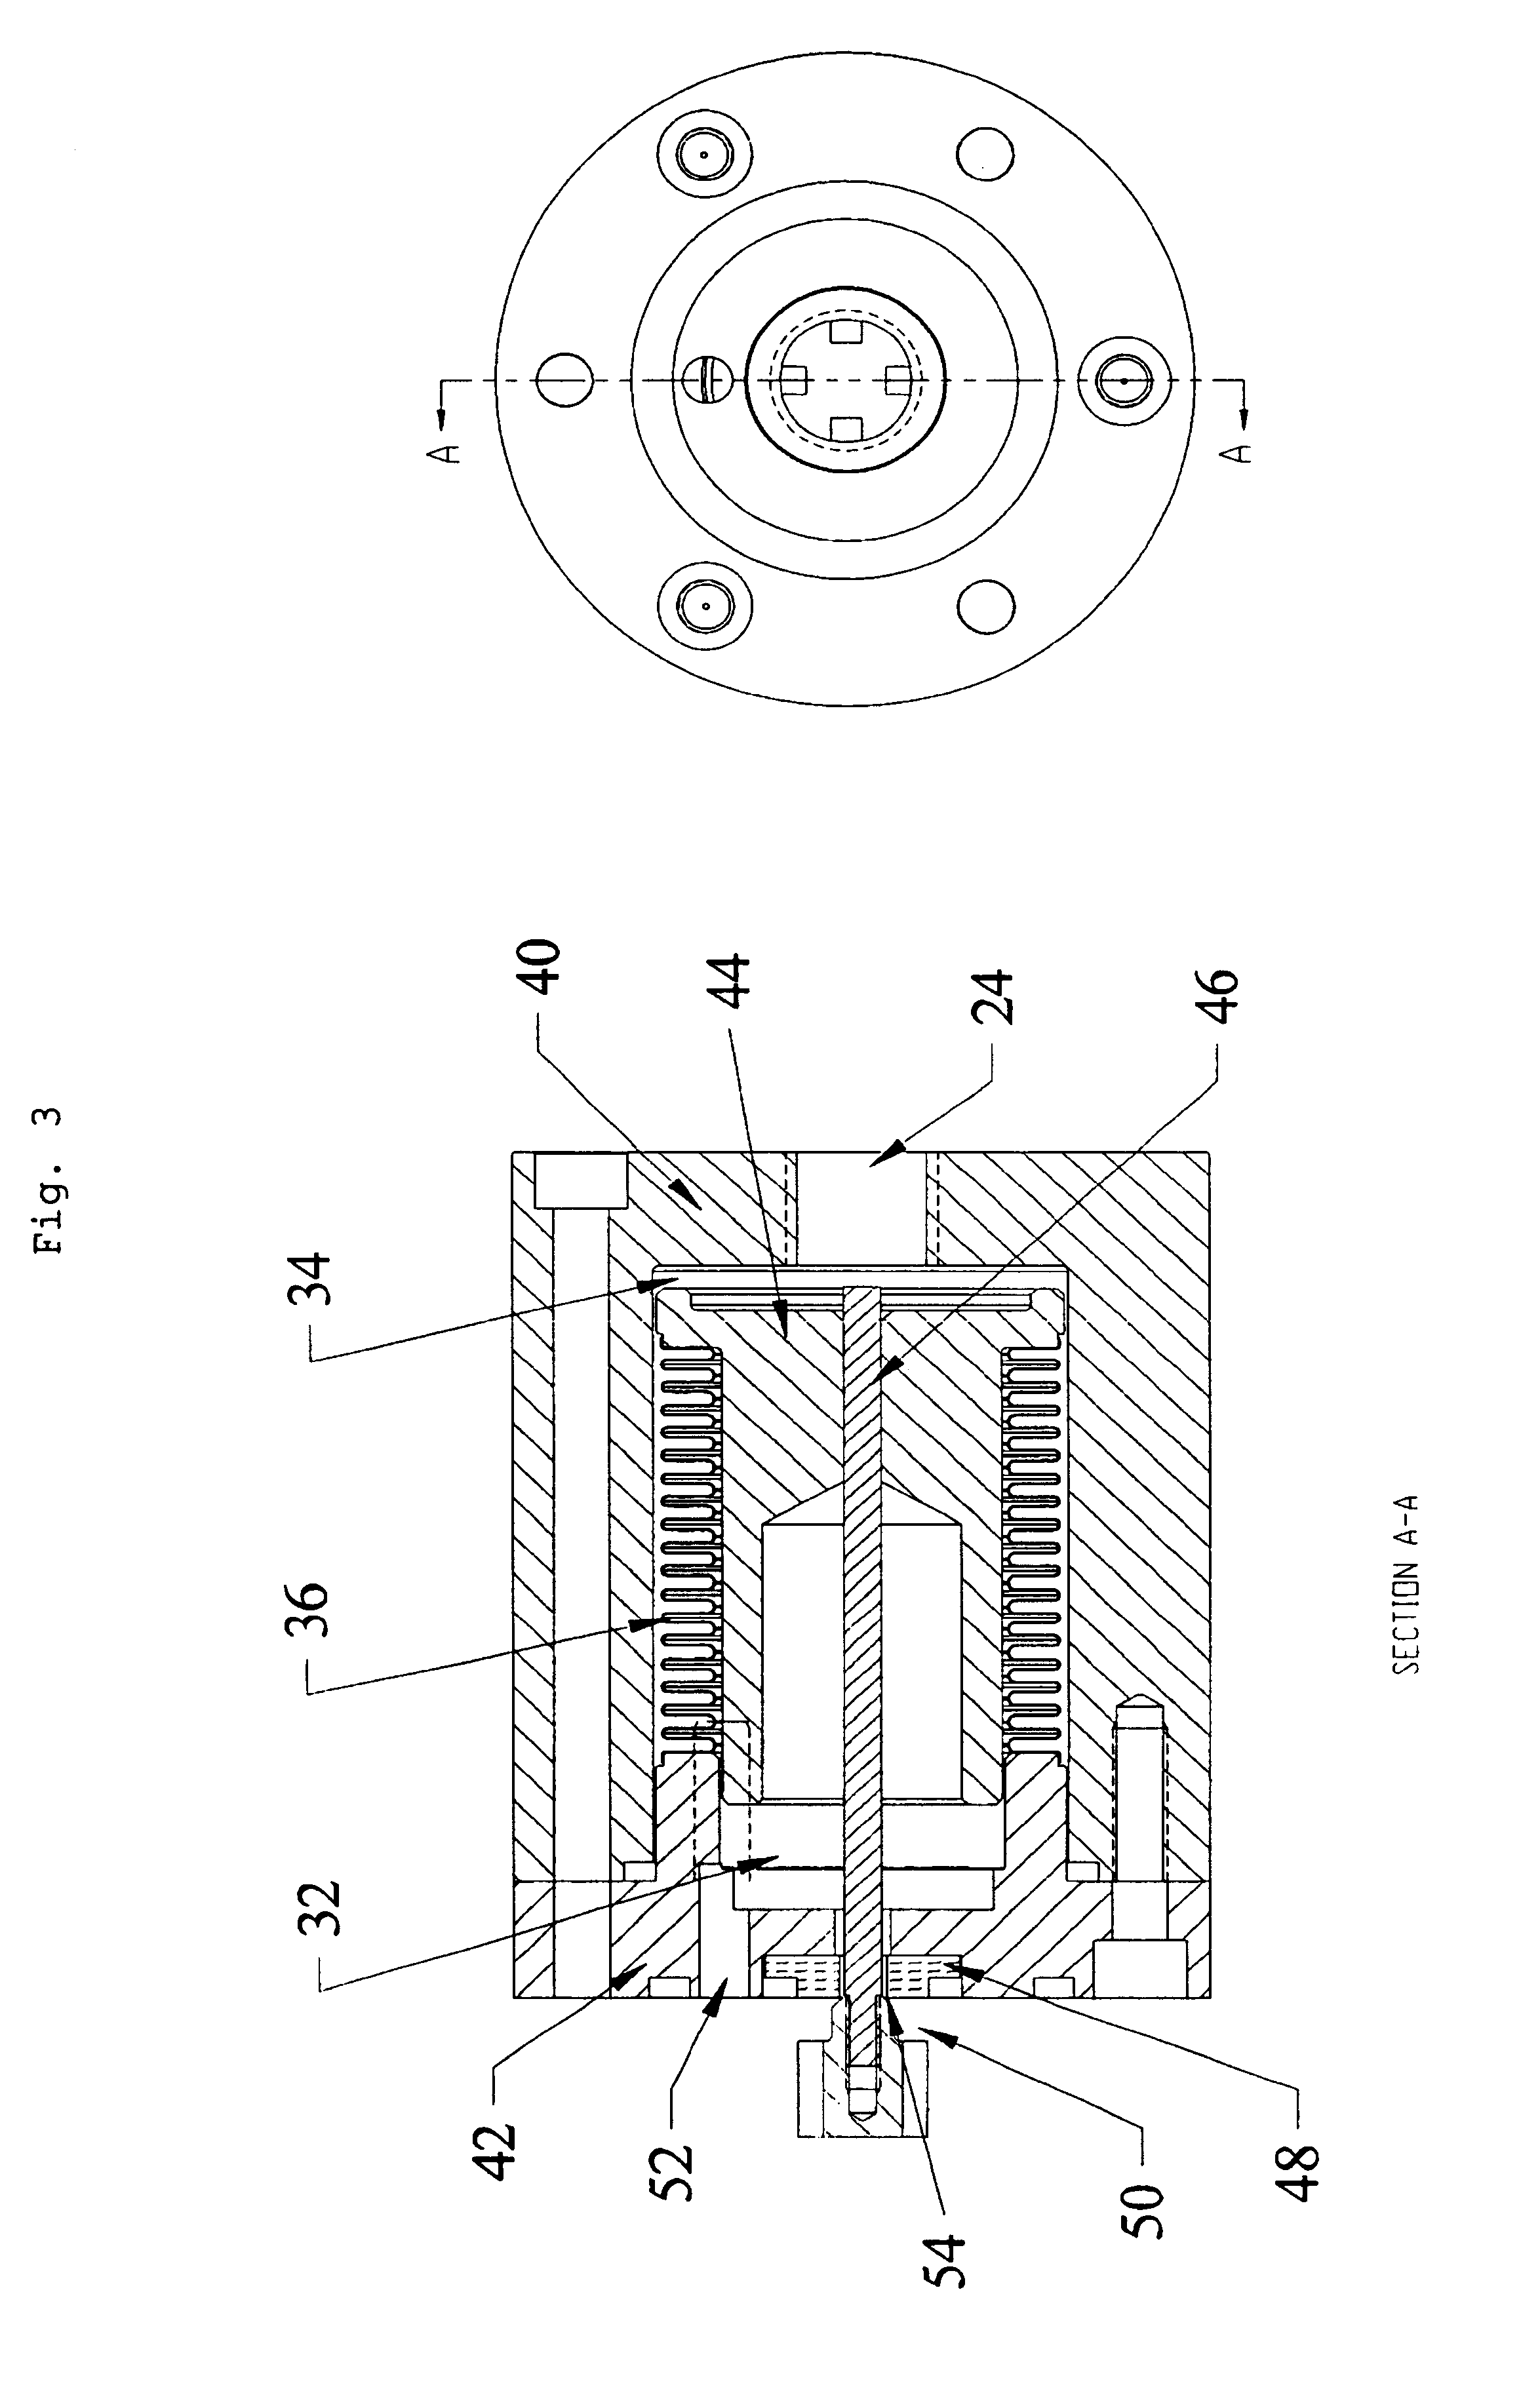 Method of wetting webs of paper or other hygroscopic material